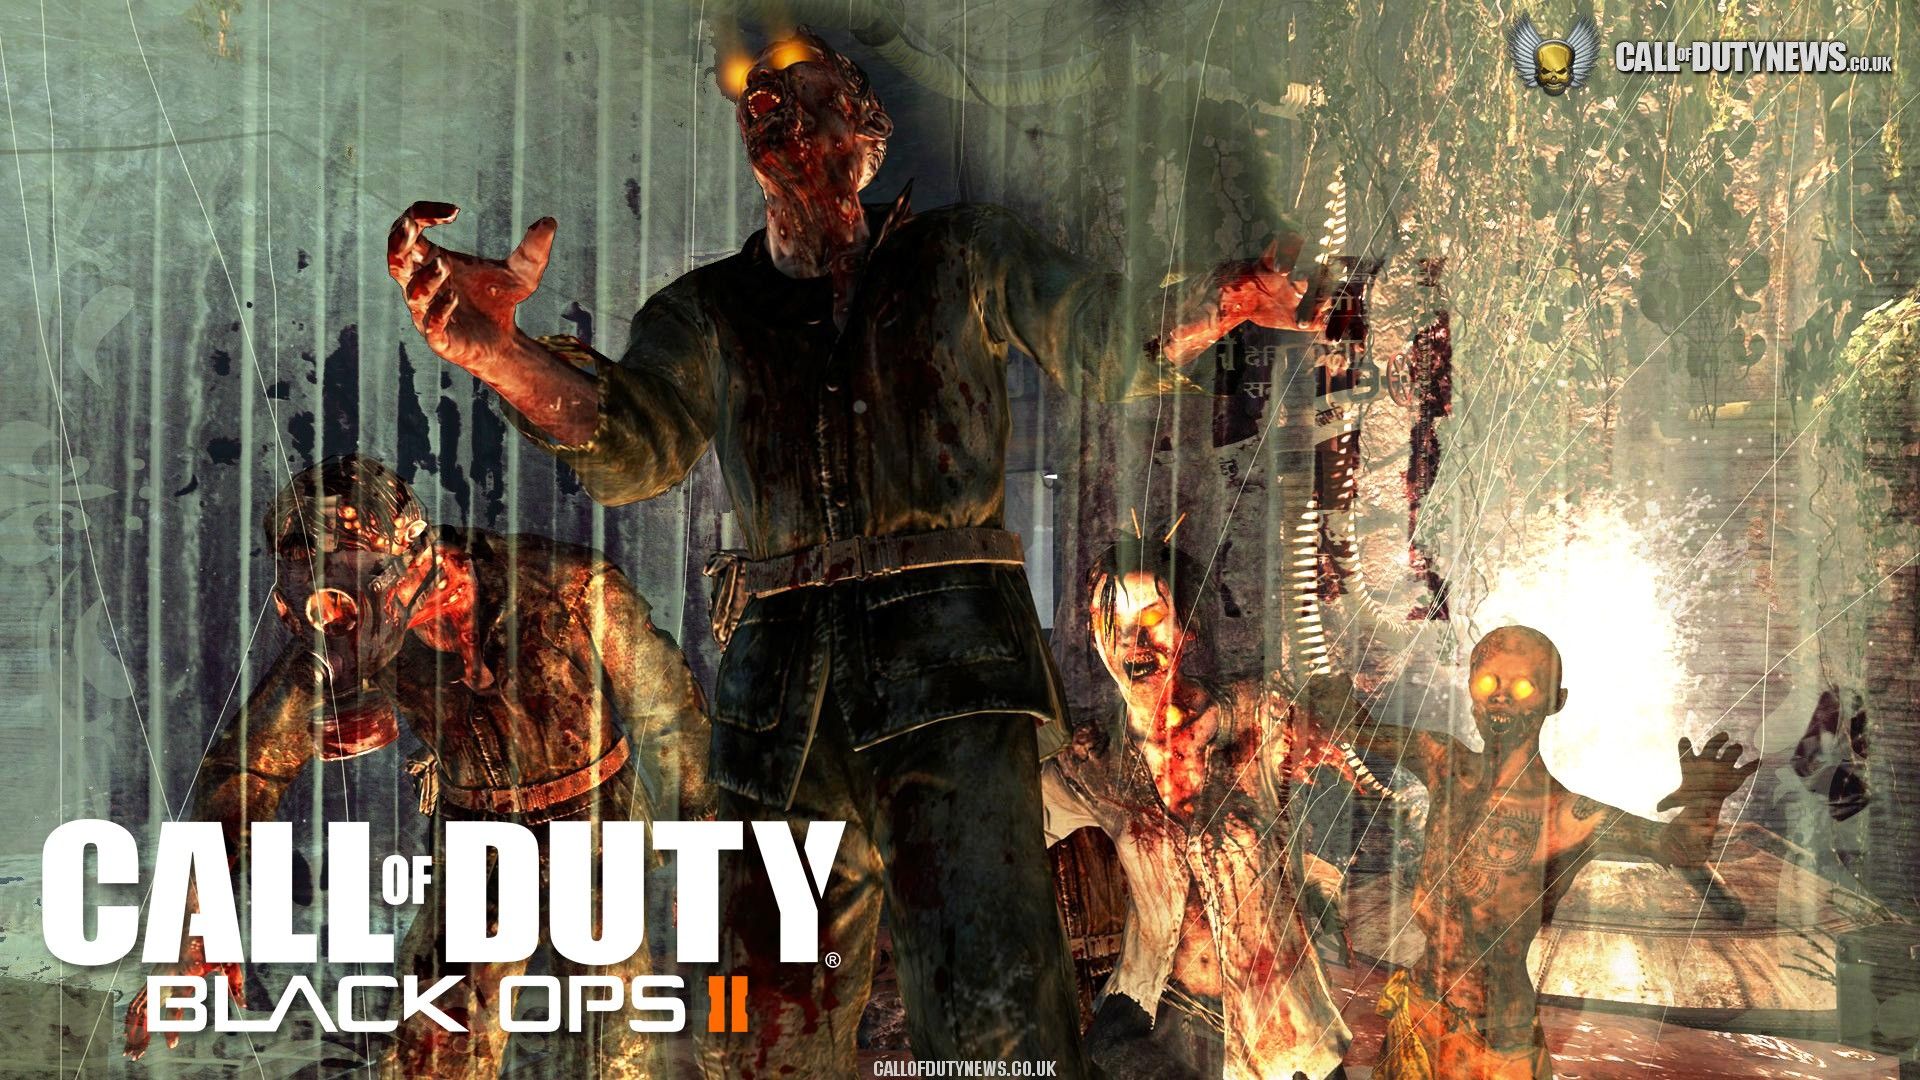 Black ops 2 wallpaper 69 zombies Call of Duty Blog